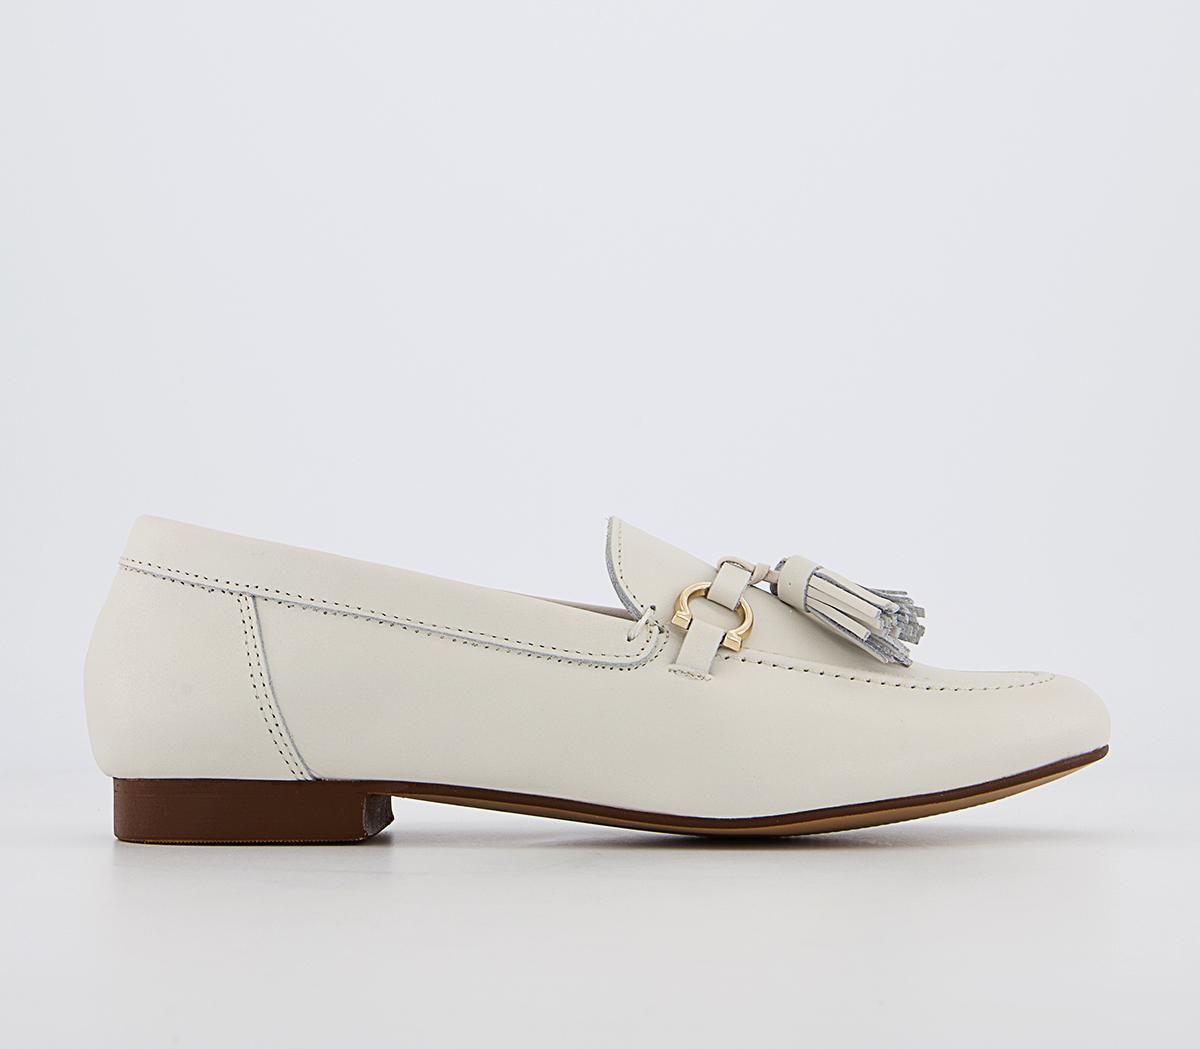 OFFICEFlock Suede Tassel LoafersOff White Leather